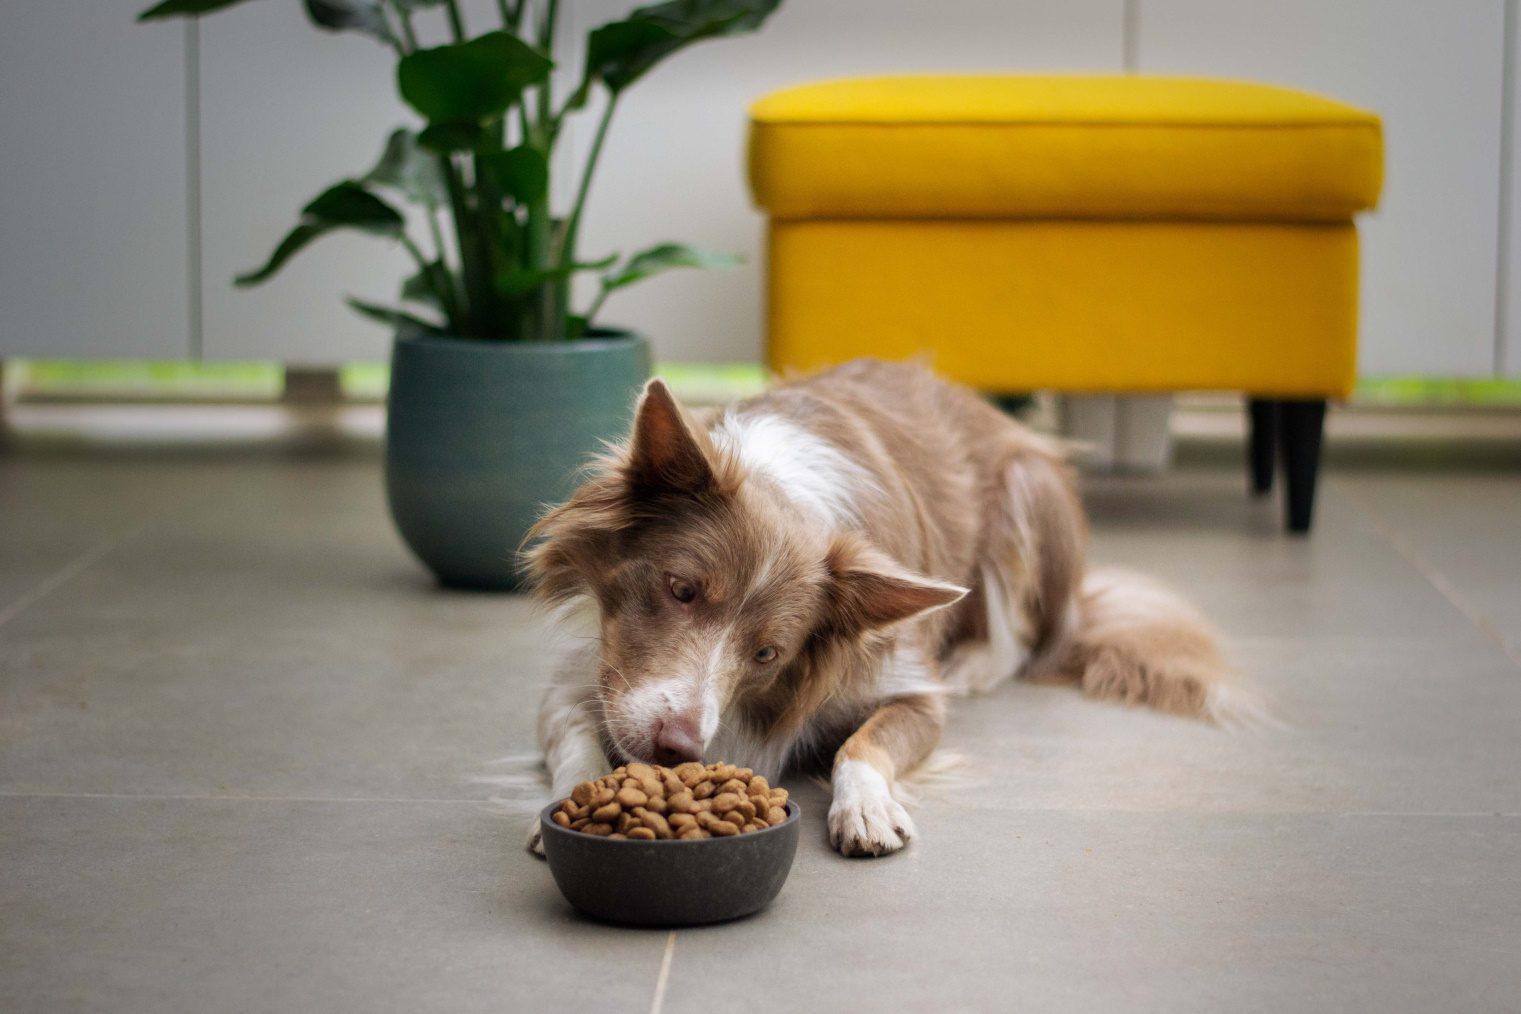 Border Collie lying in front of a bowl of pet food. Yellow ottoman and a green plant behind the dog.